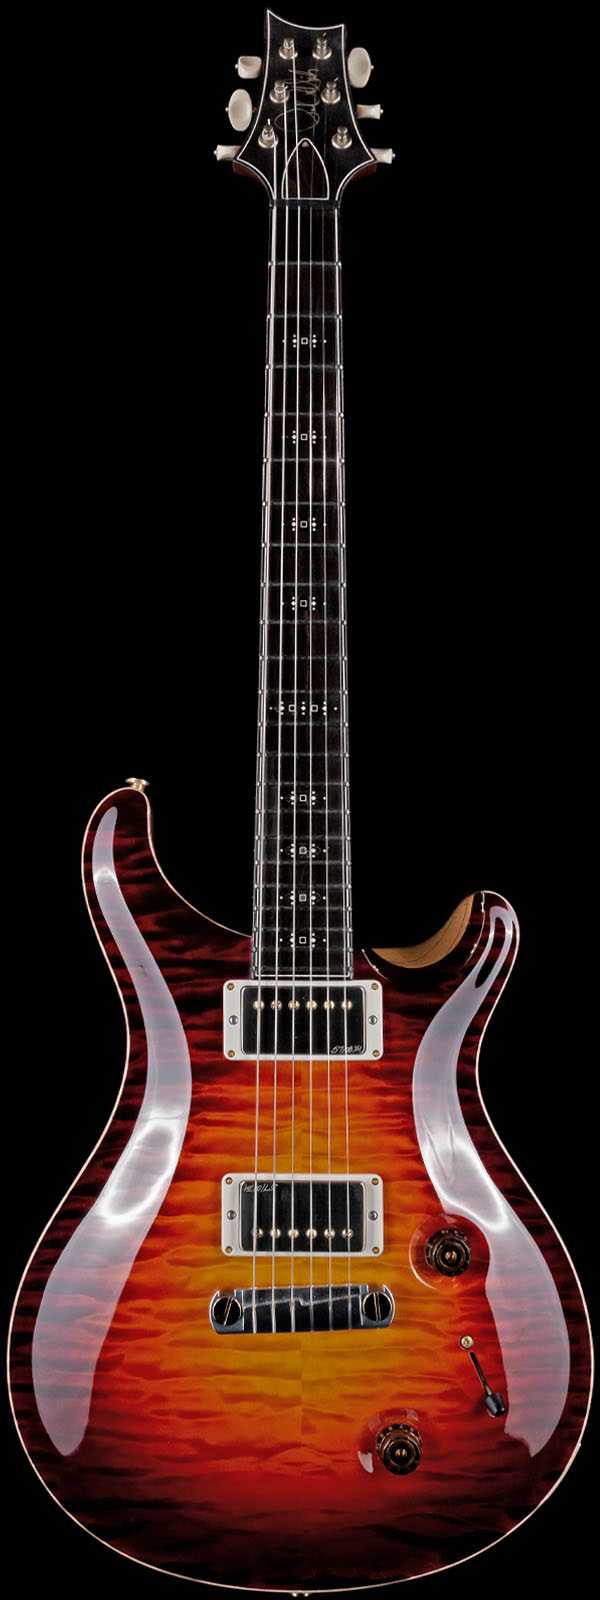 PRS 2013 Private Stock 4649 Custom 22 Quilt Experience LTD Number 5 Dragons Breath Glow